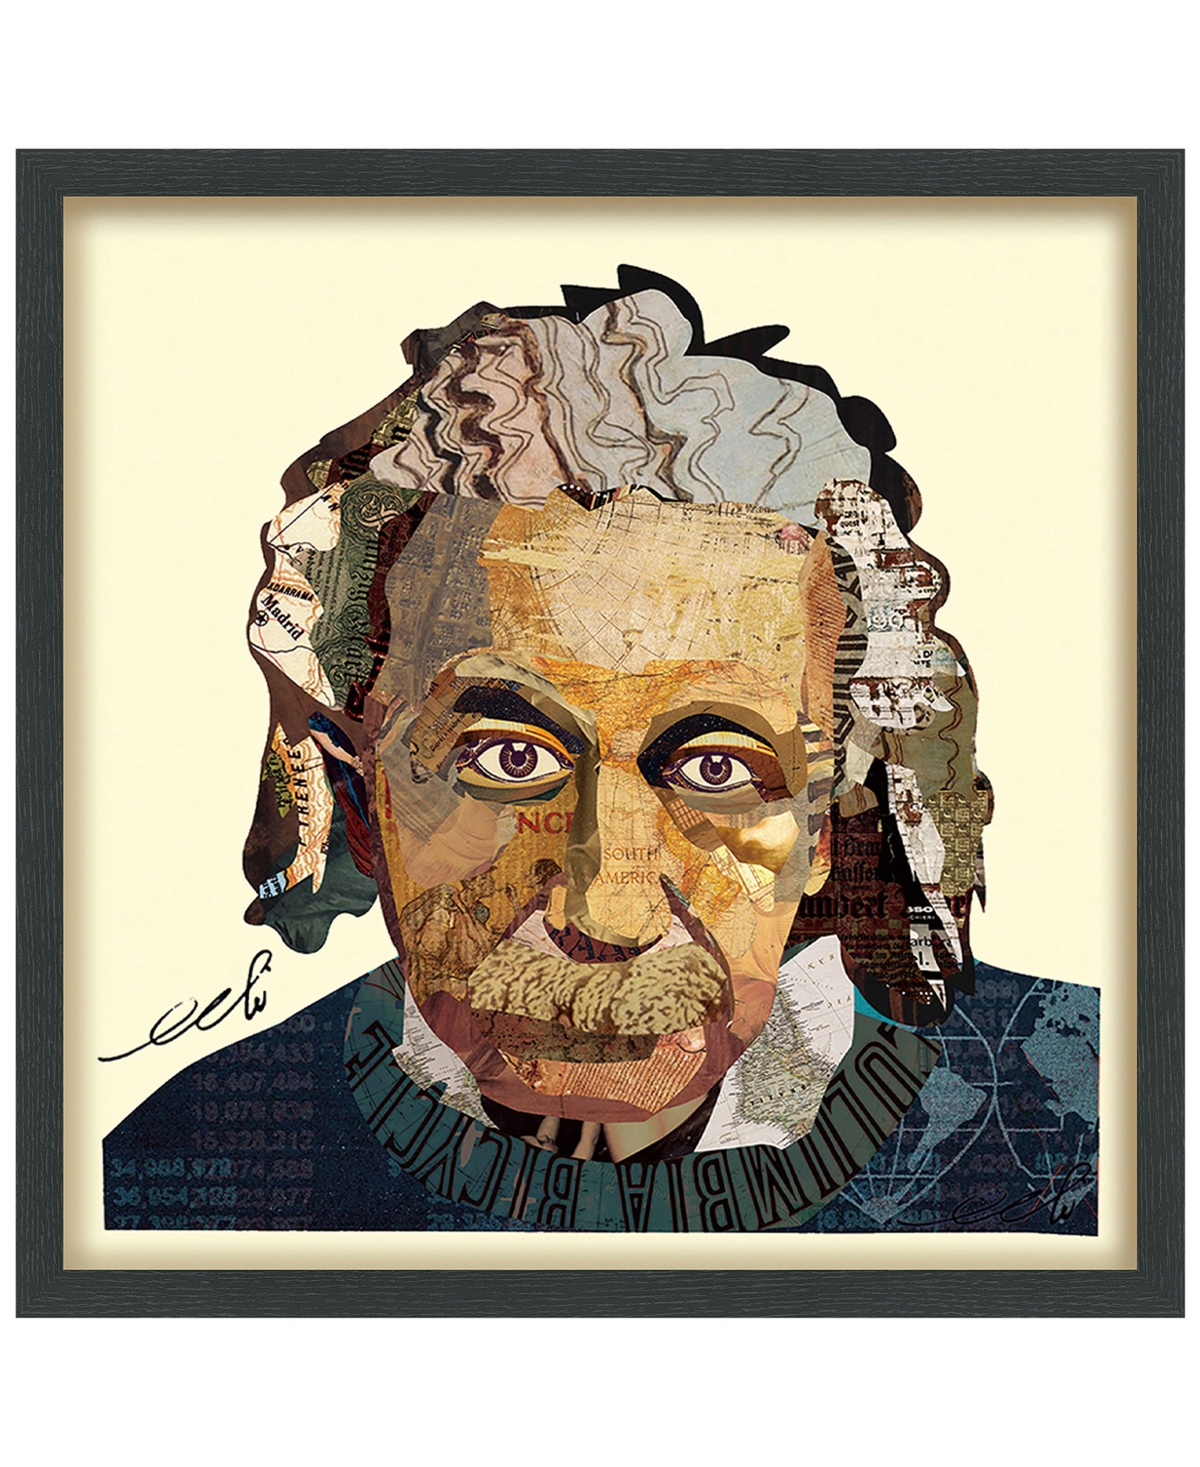 Empire Art Direct "einstein" Hand-made Dimensional Art Collage, Under Glass, Encased On A Black Shadow Box Frame, 25" In Multi-color